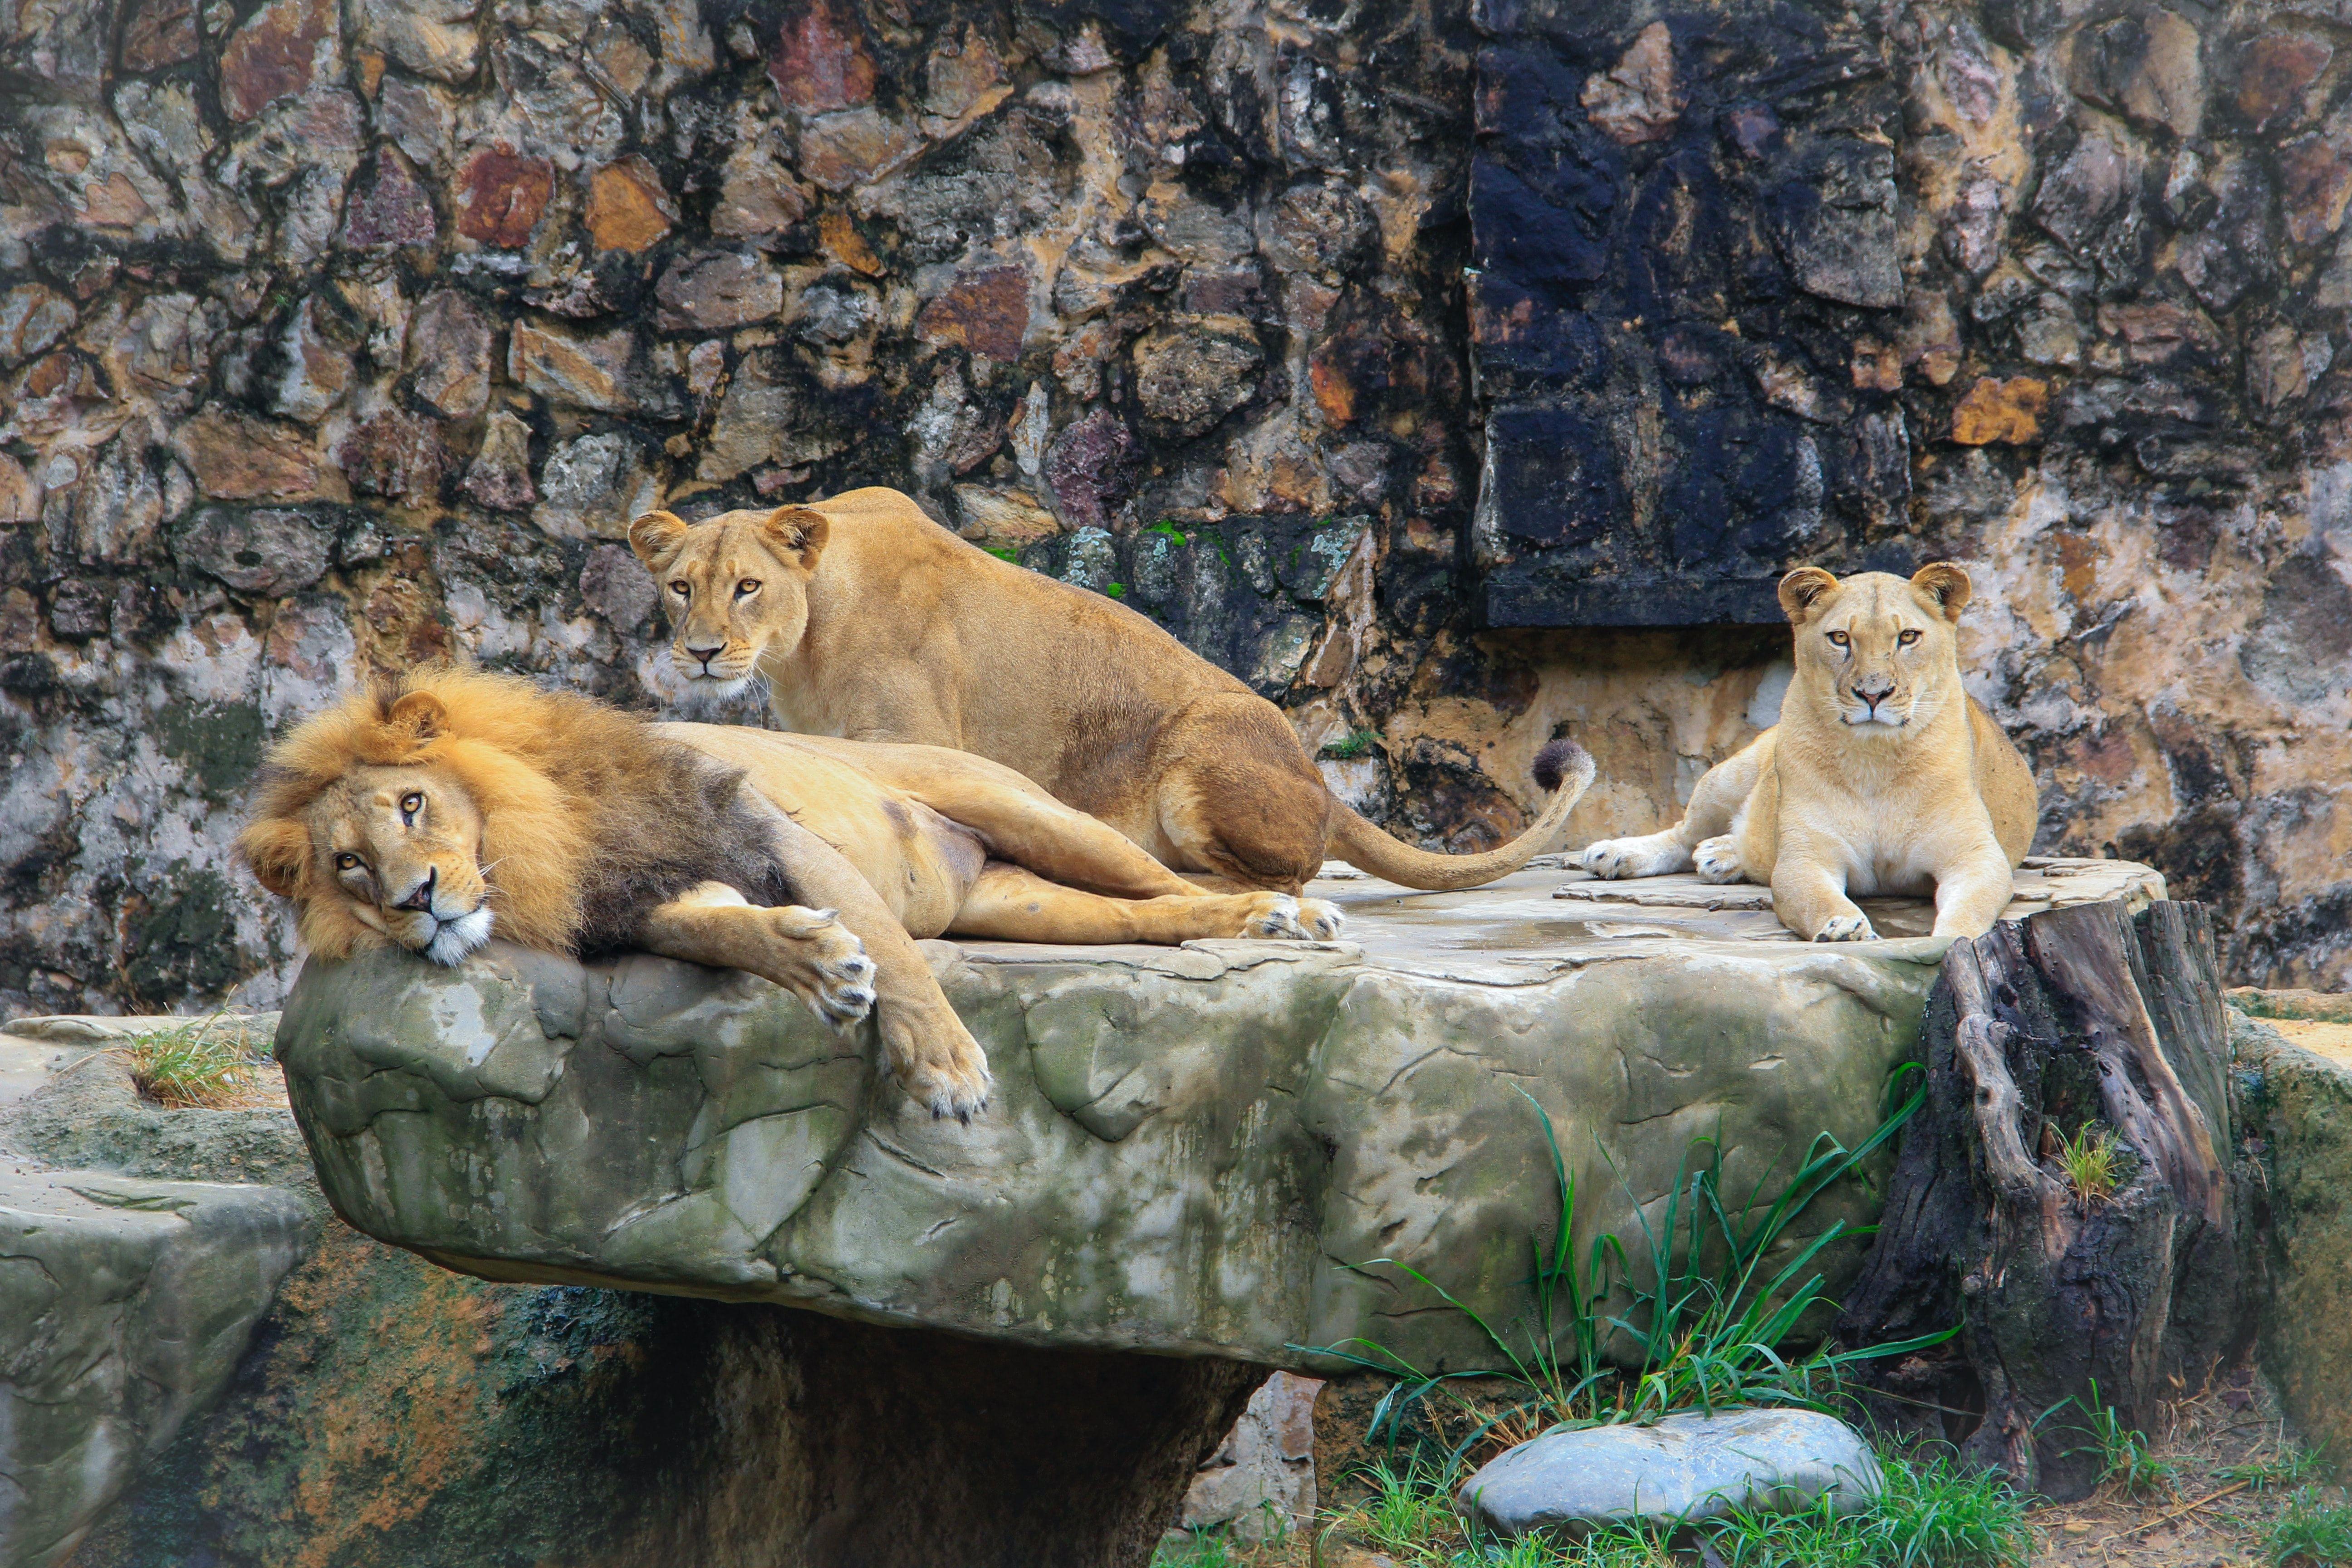 Lions in Asian Zoos